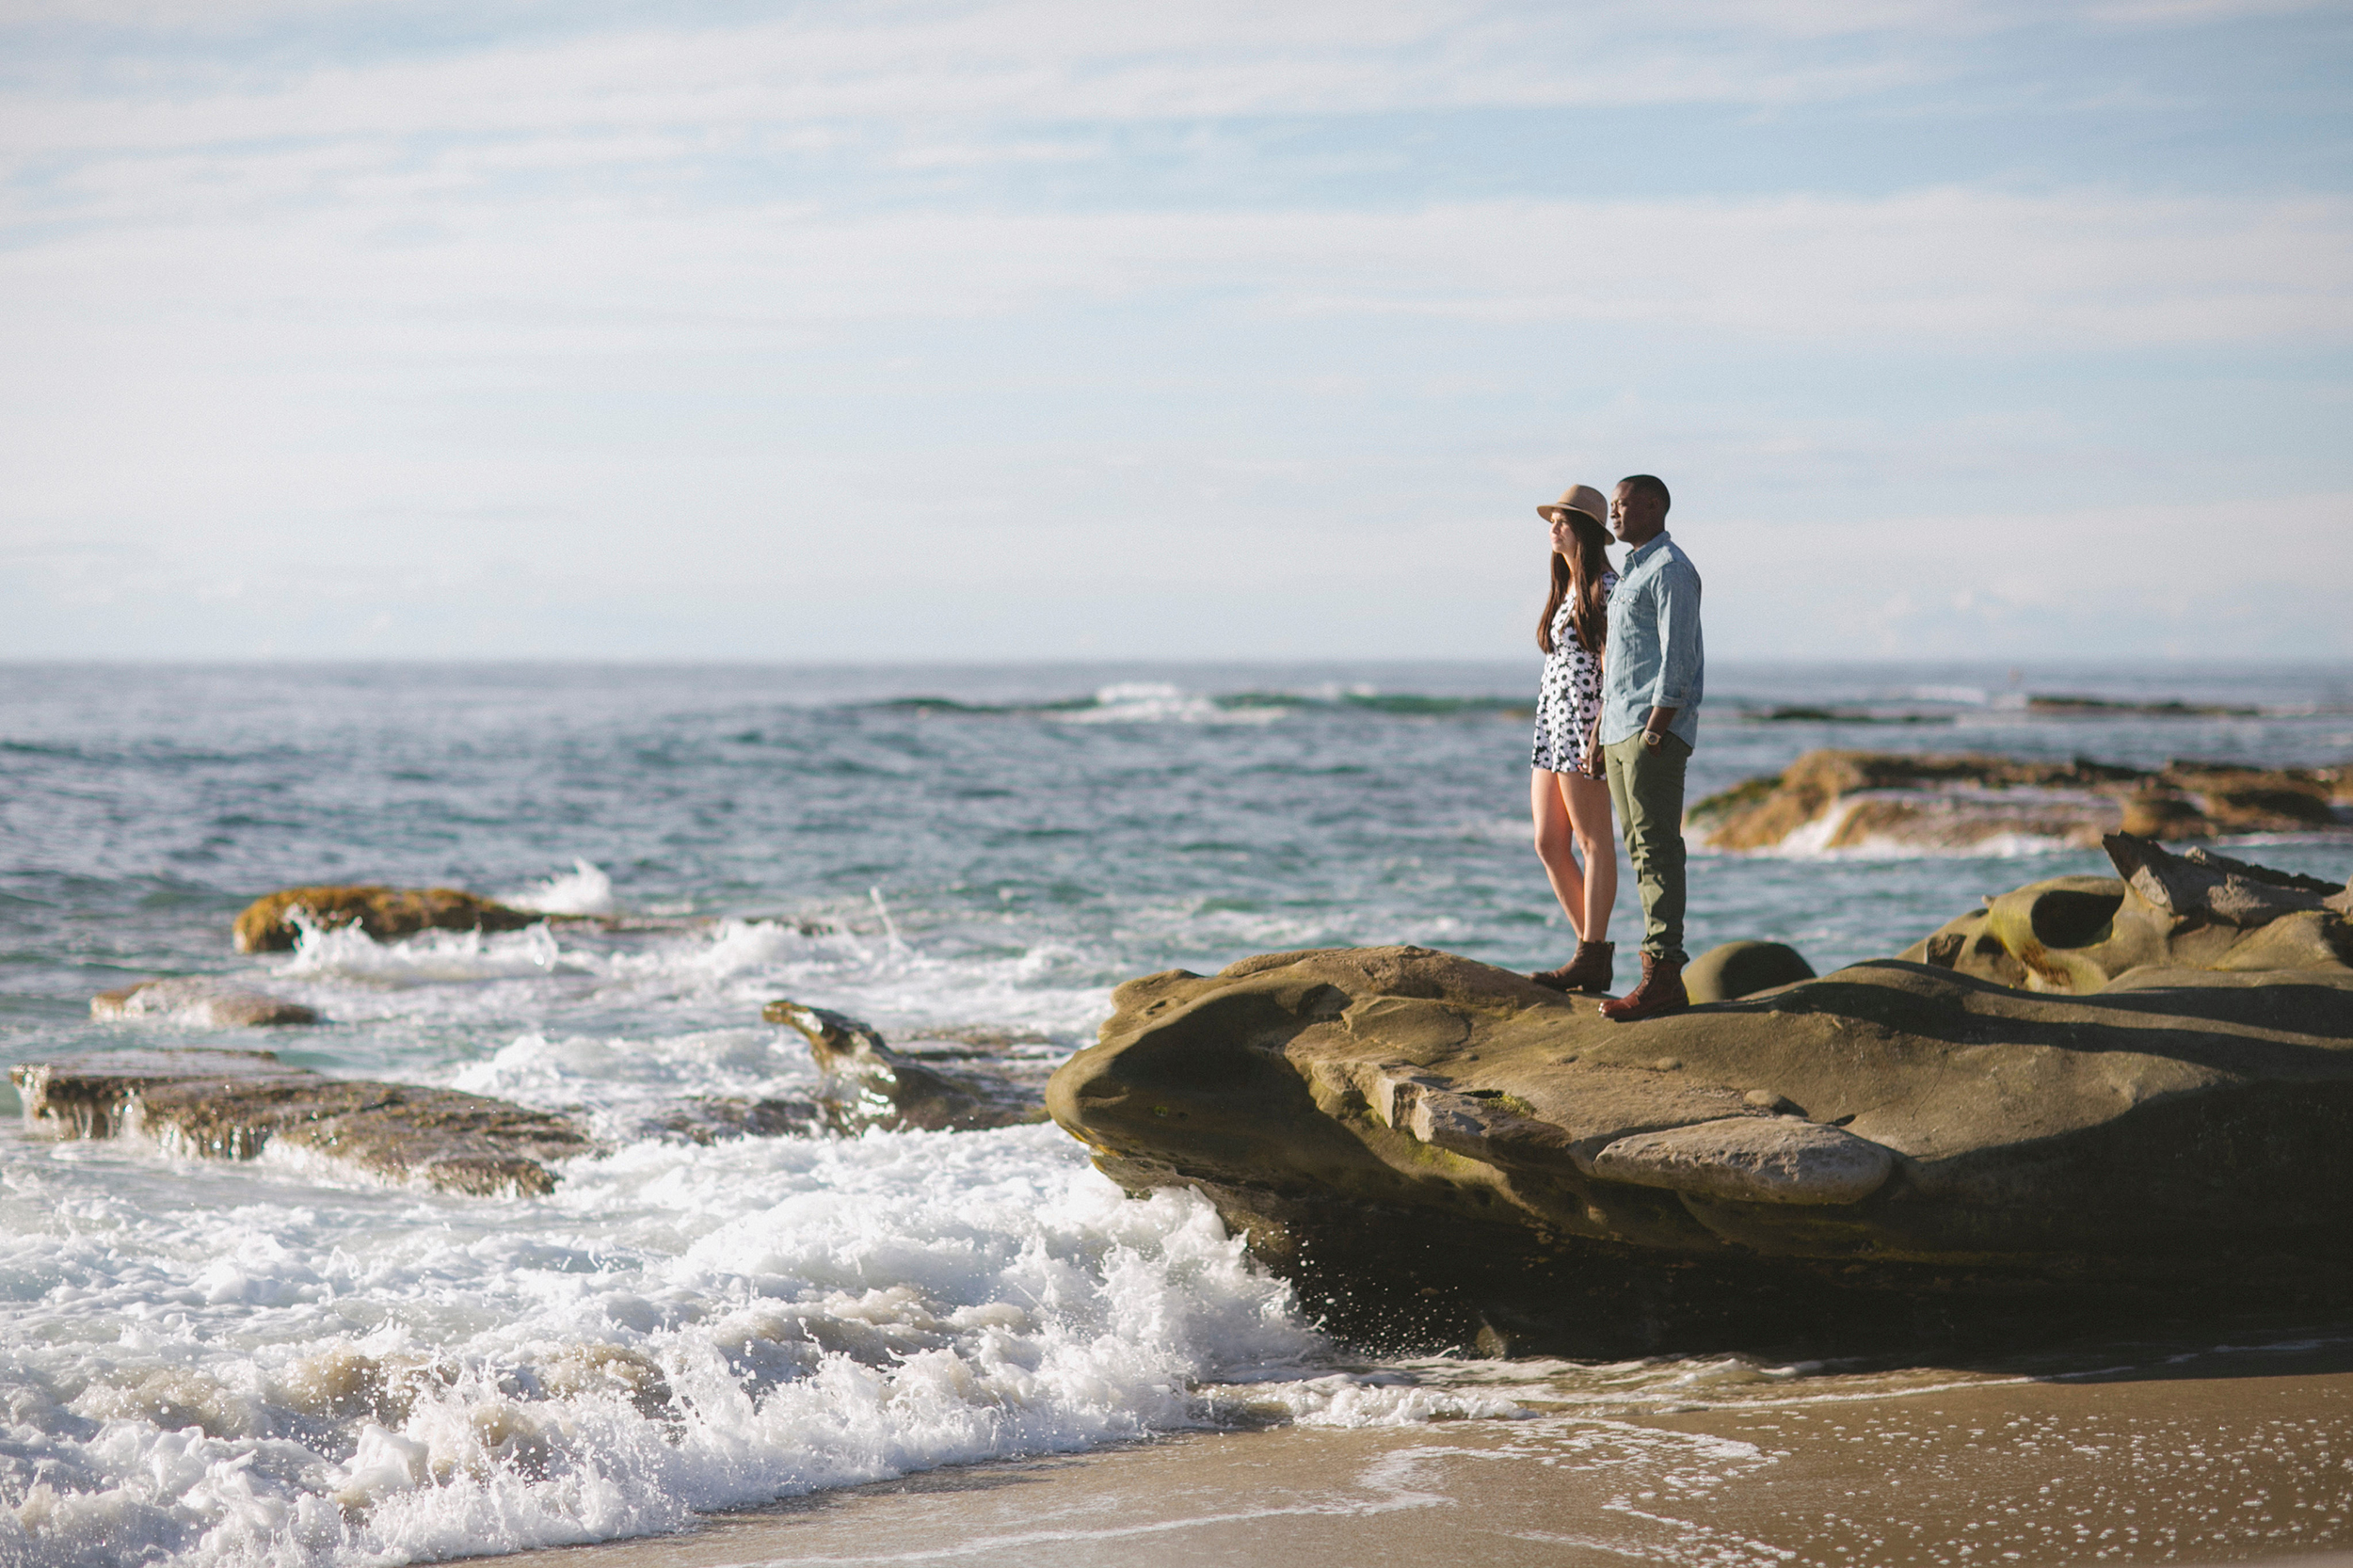 Colby-and-Jess-Adventure-Engagement-Photography-Torrey-Pines-La-Jolla-California56.jpg